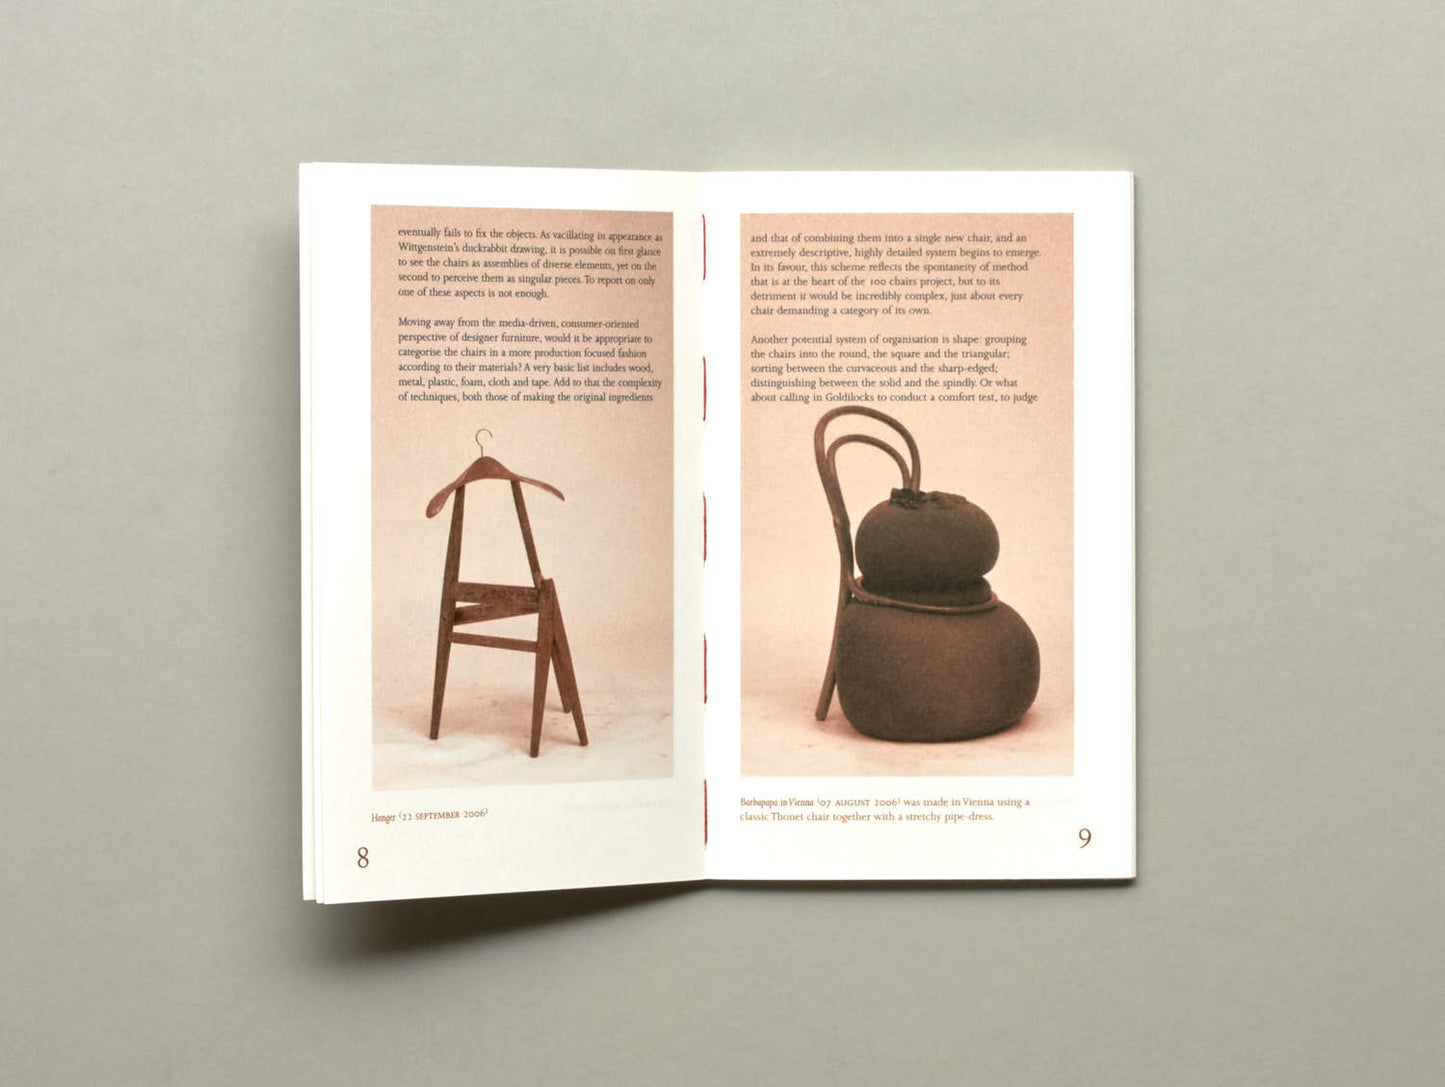 Martino Gamper, 100 Chairs in 100 Days and its 100 Ways (5th edition, 5th size)